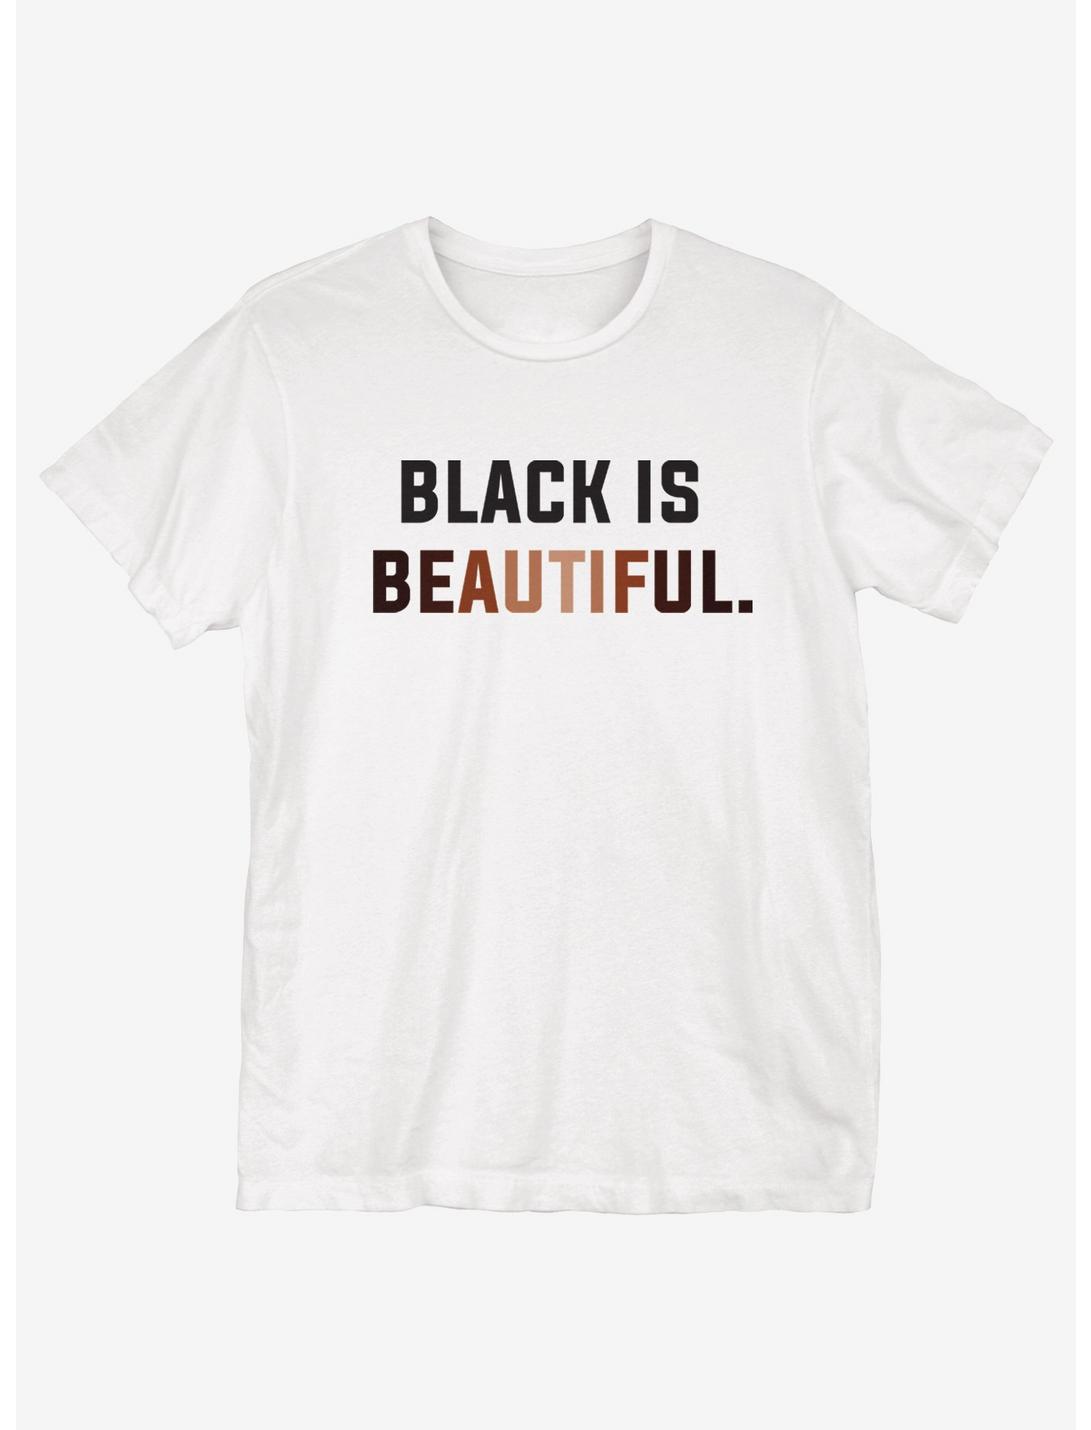 Black History Month Black Is Beautiful T-Shirt, WHITE, hi-res